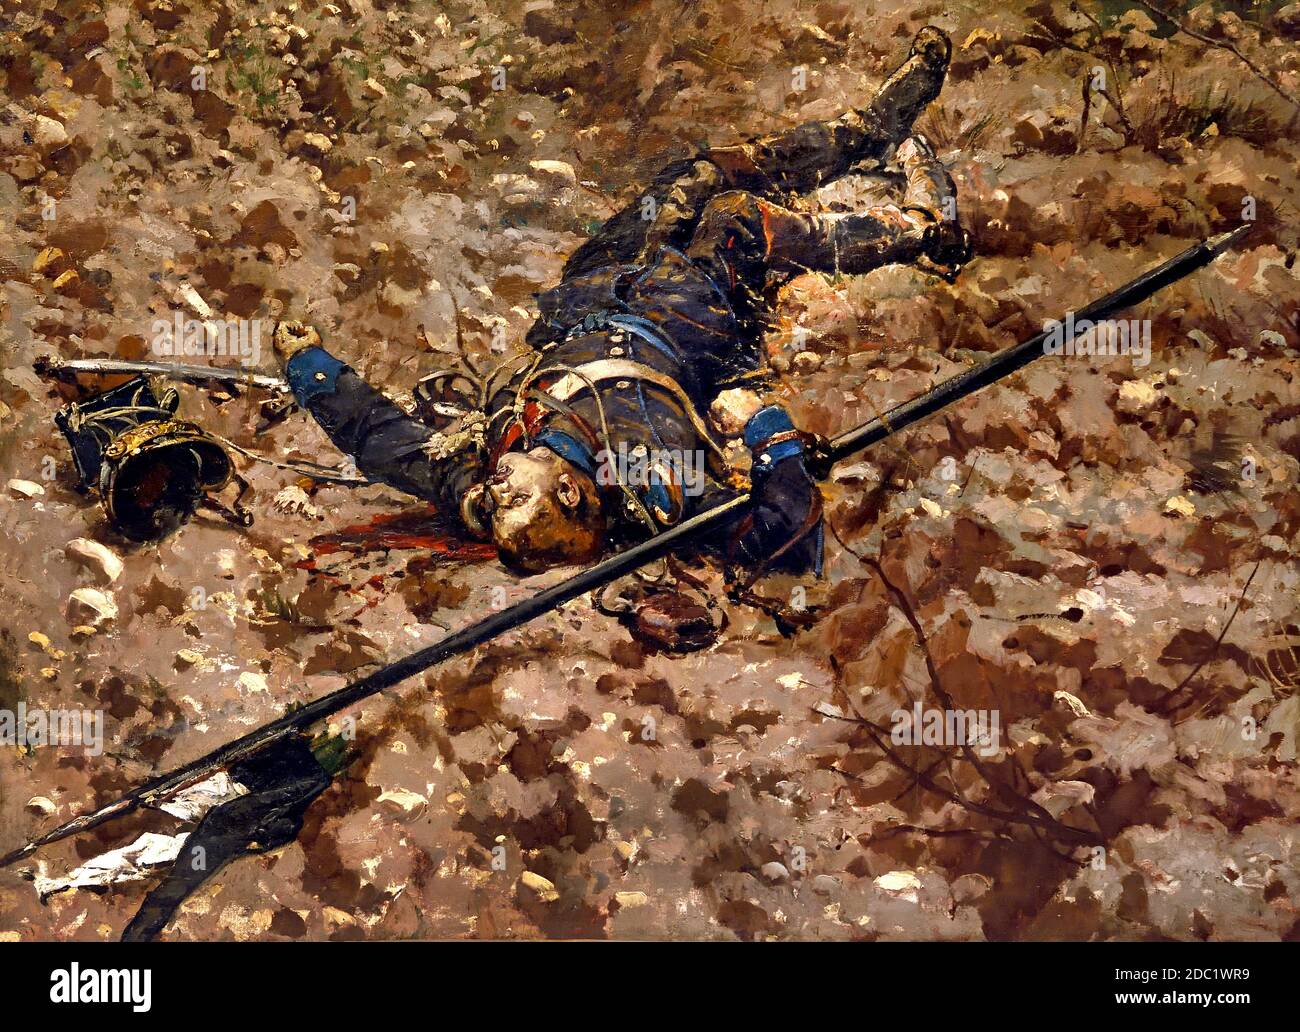 Dead Uhlan 16th regiment (Altmark) and cruissier from the 7th regiment, of Von Bredow Brigade. Jean-Baptiste Édouard Detaille, 1848 – 1912, Alphonse de Neuville, 1835-1885,  France, French, German, Germany, ( Battle of Rezonville August 1870 ) Stock Photo